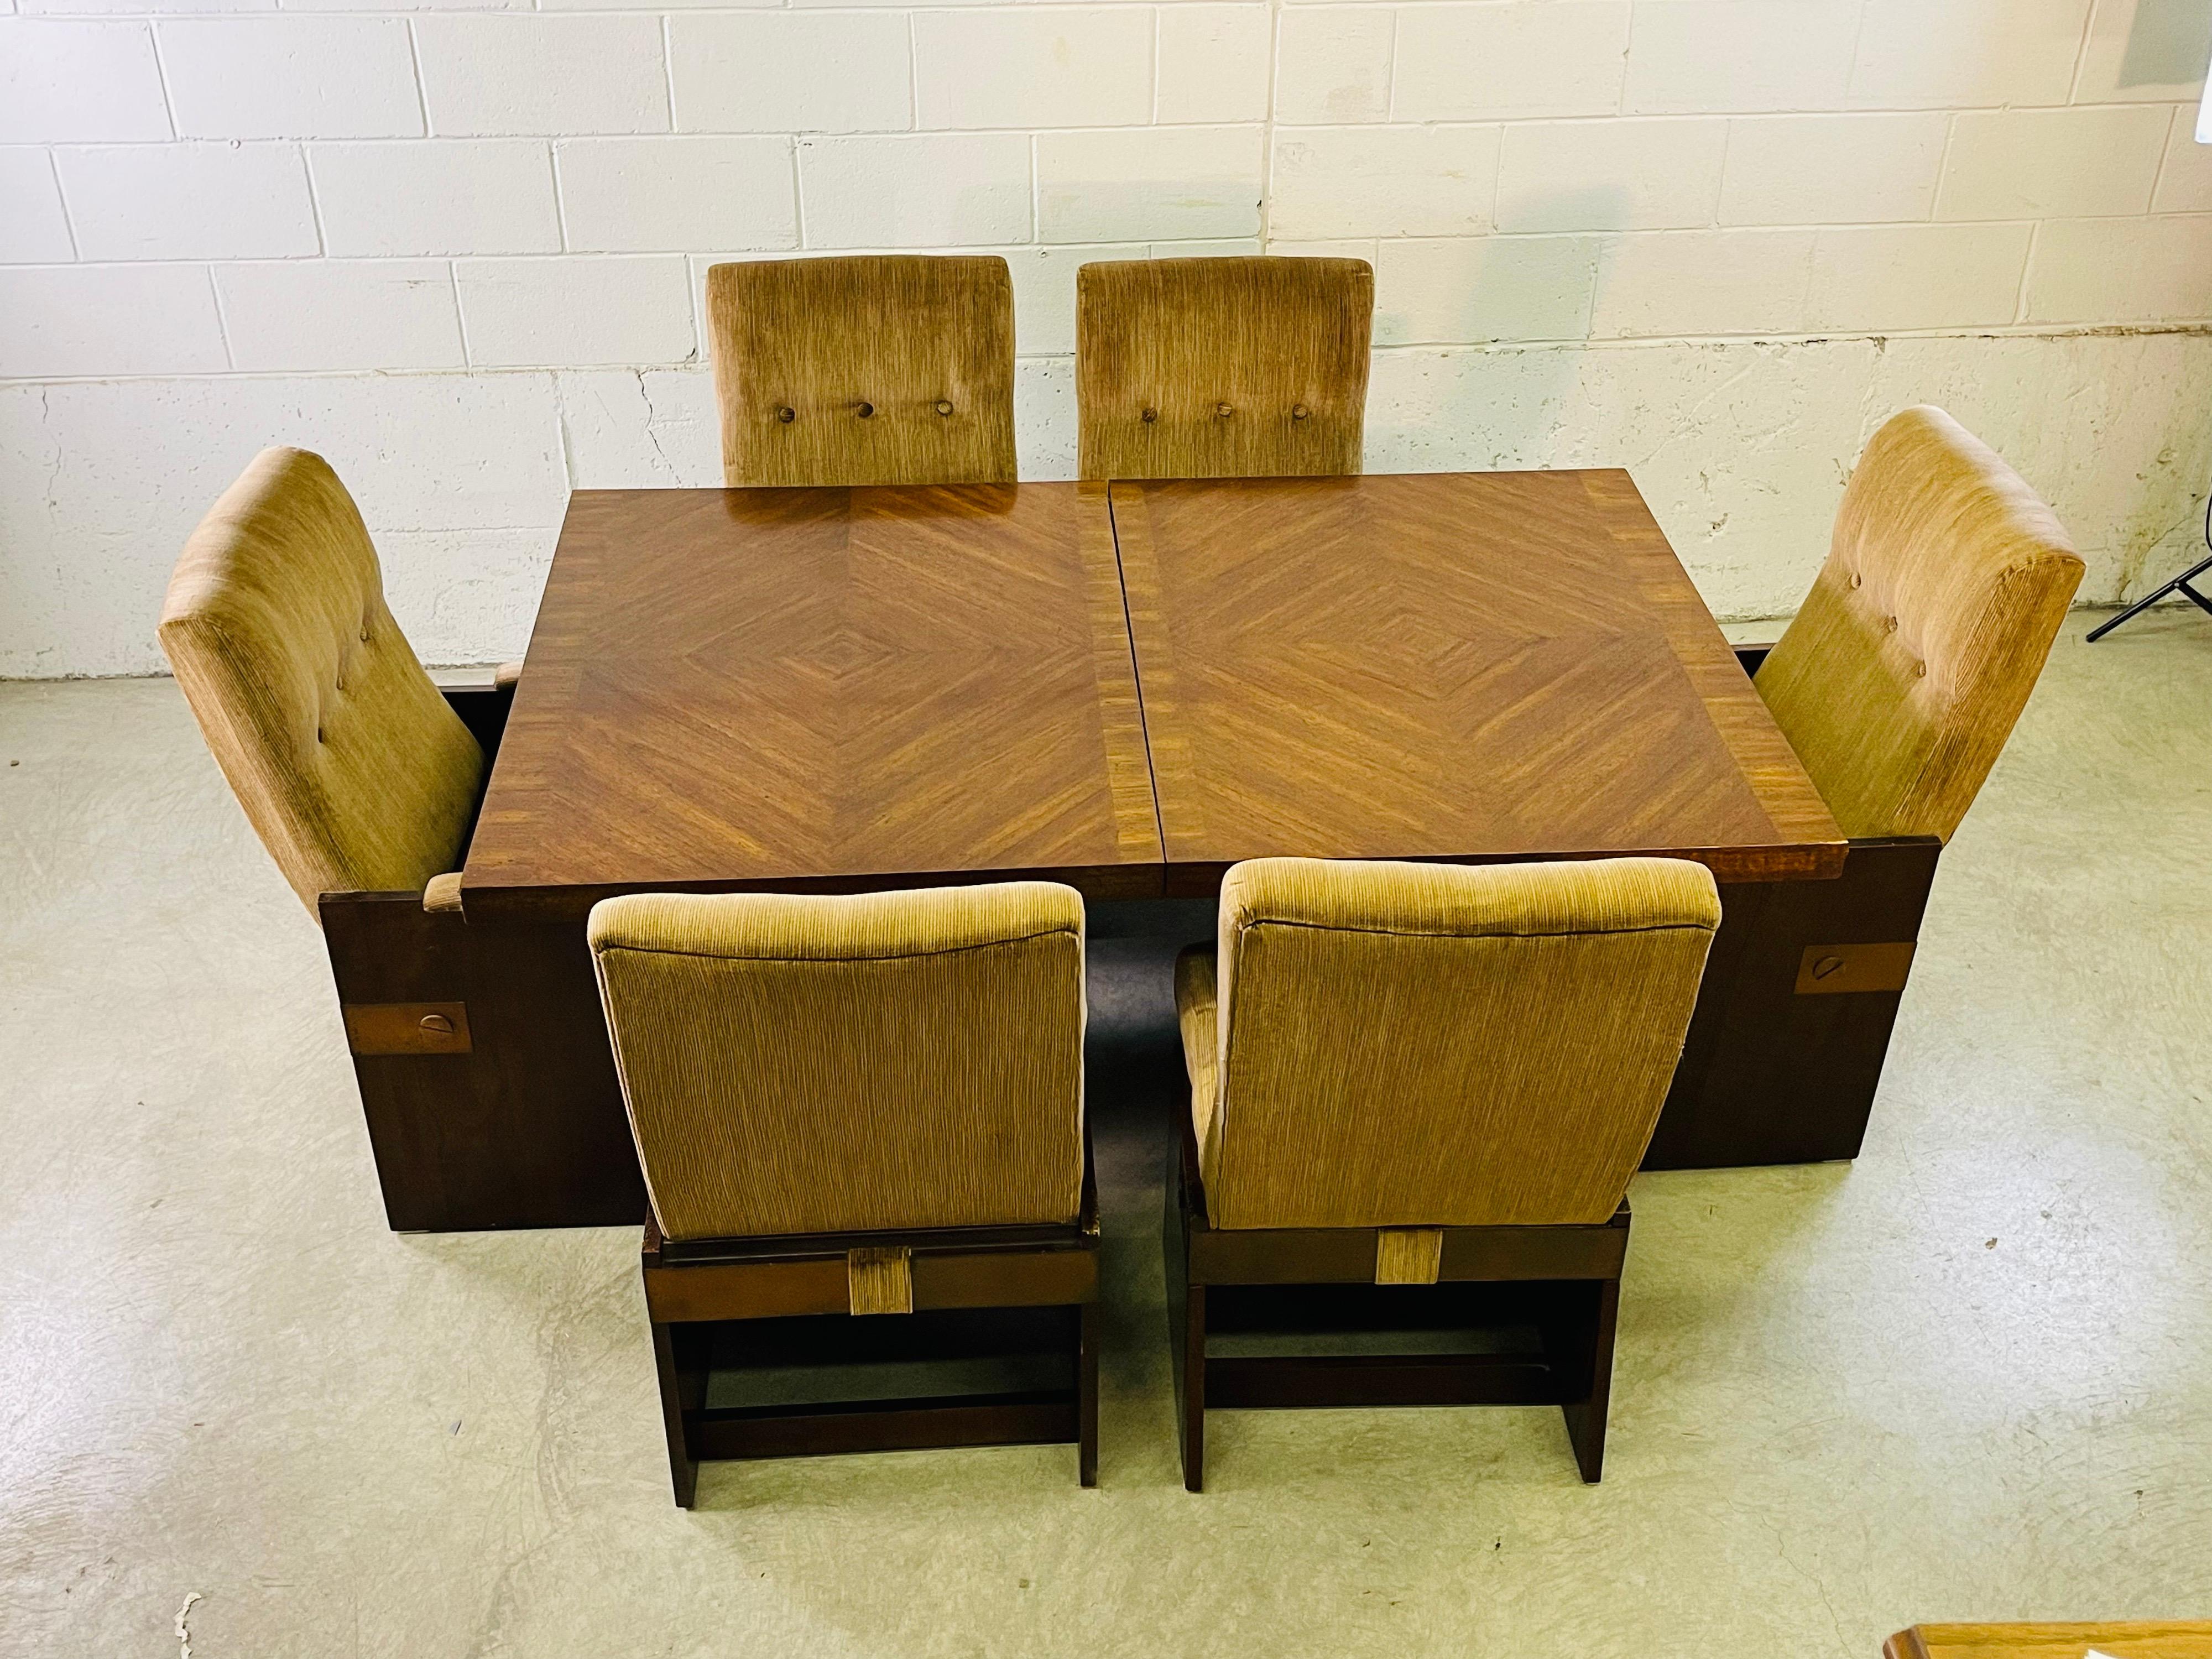 1970s wood dining table and chairs